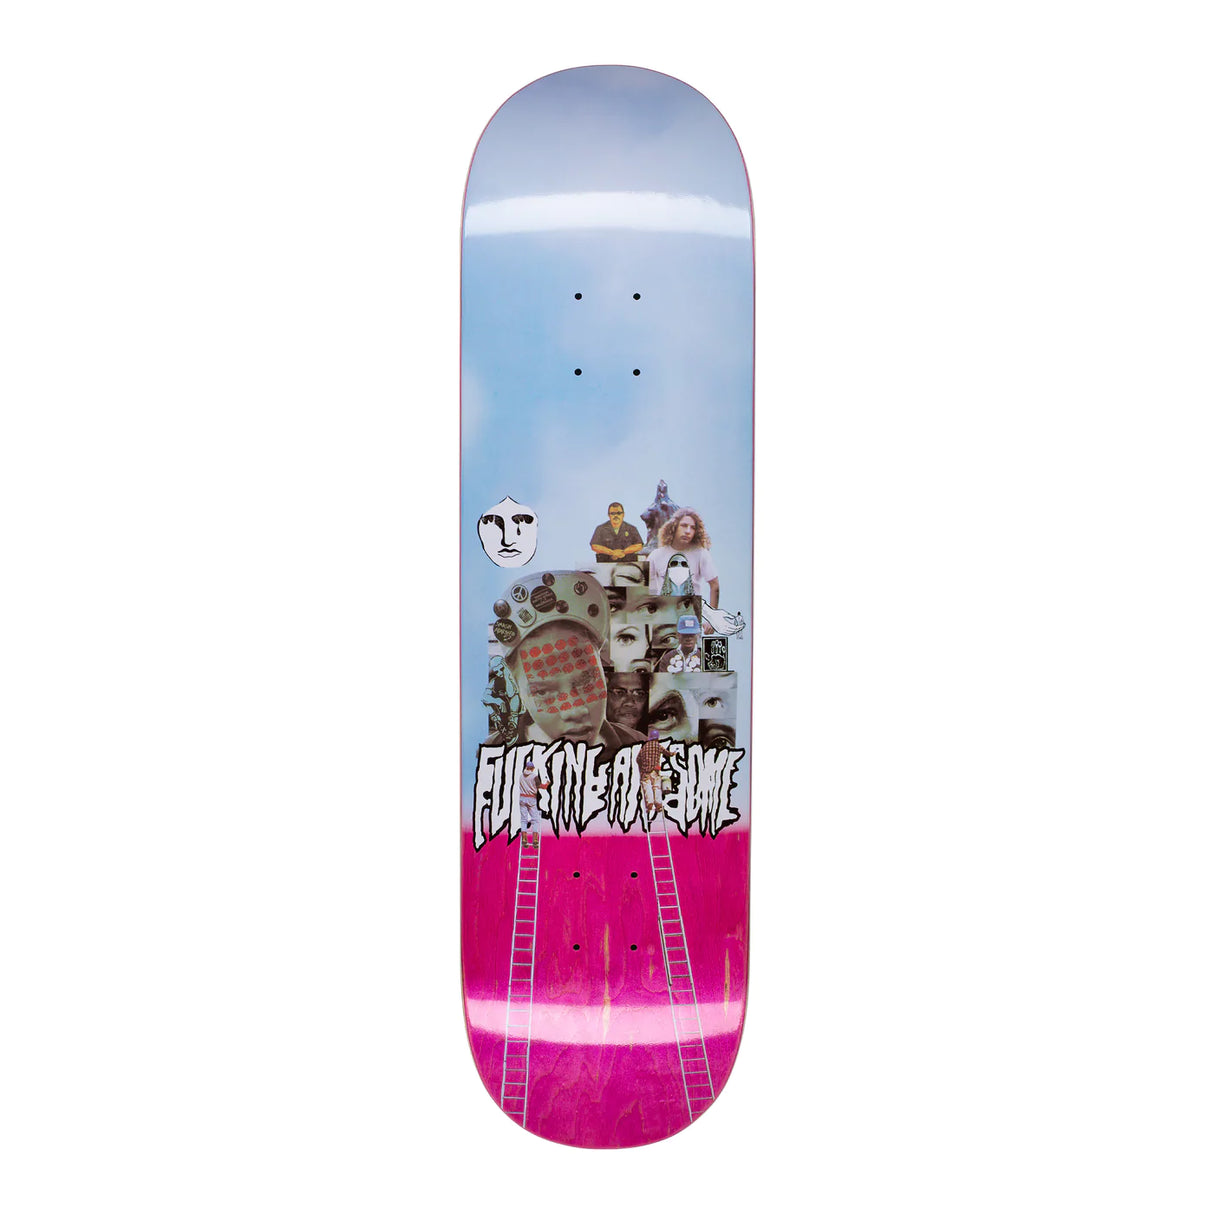 Fucking Awesome Ladders 8.25" Assorted Stain Skateboard Deck